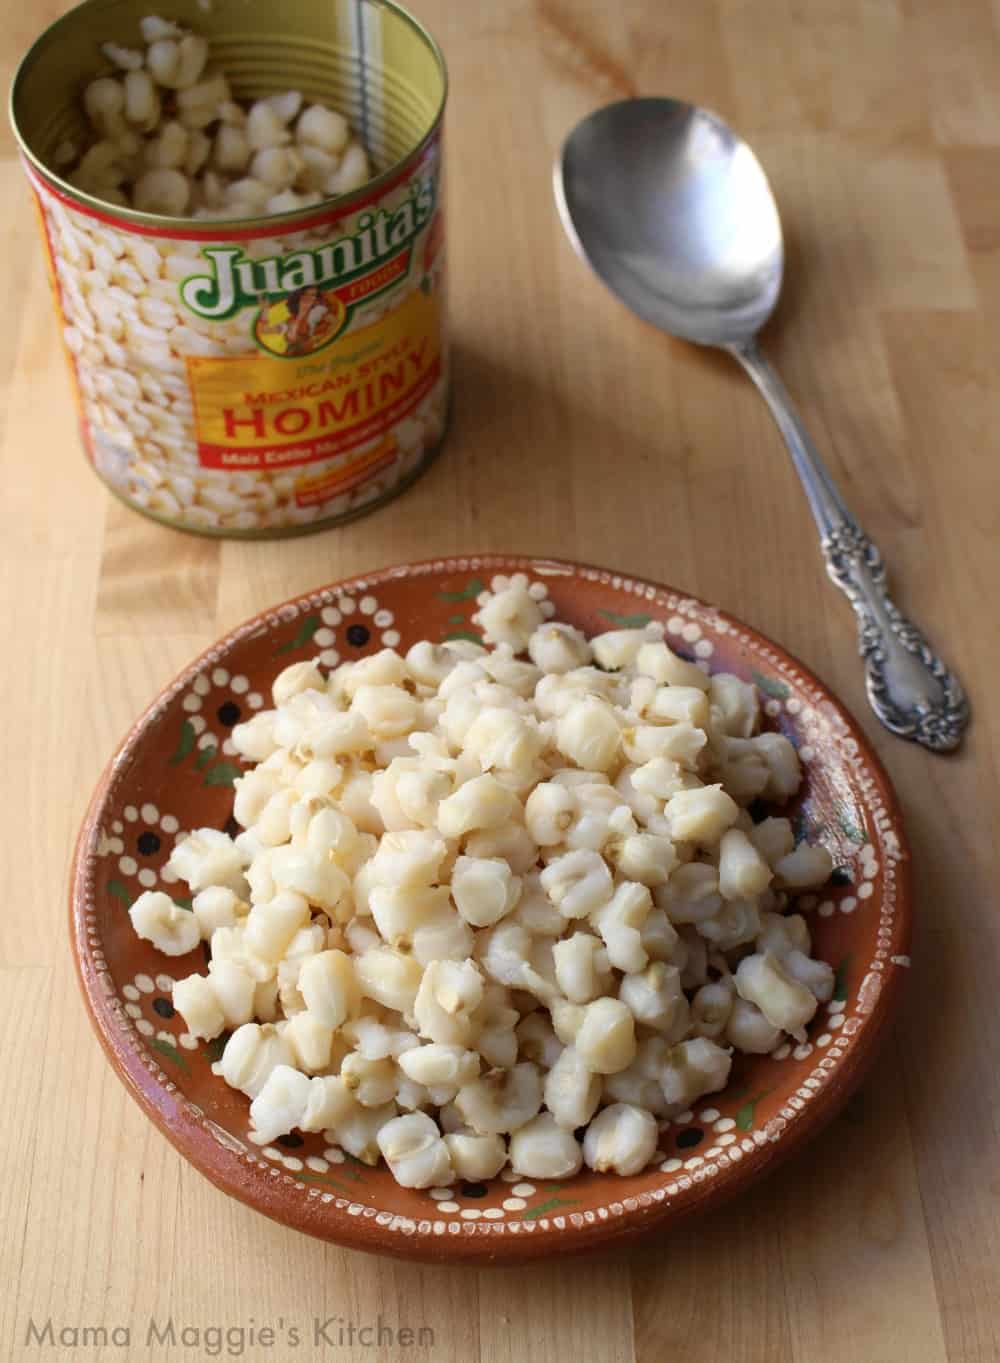 Hominy on a clay plate next to a hominy can and silver spoon.